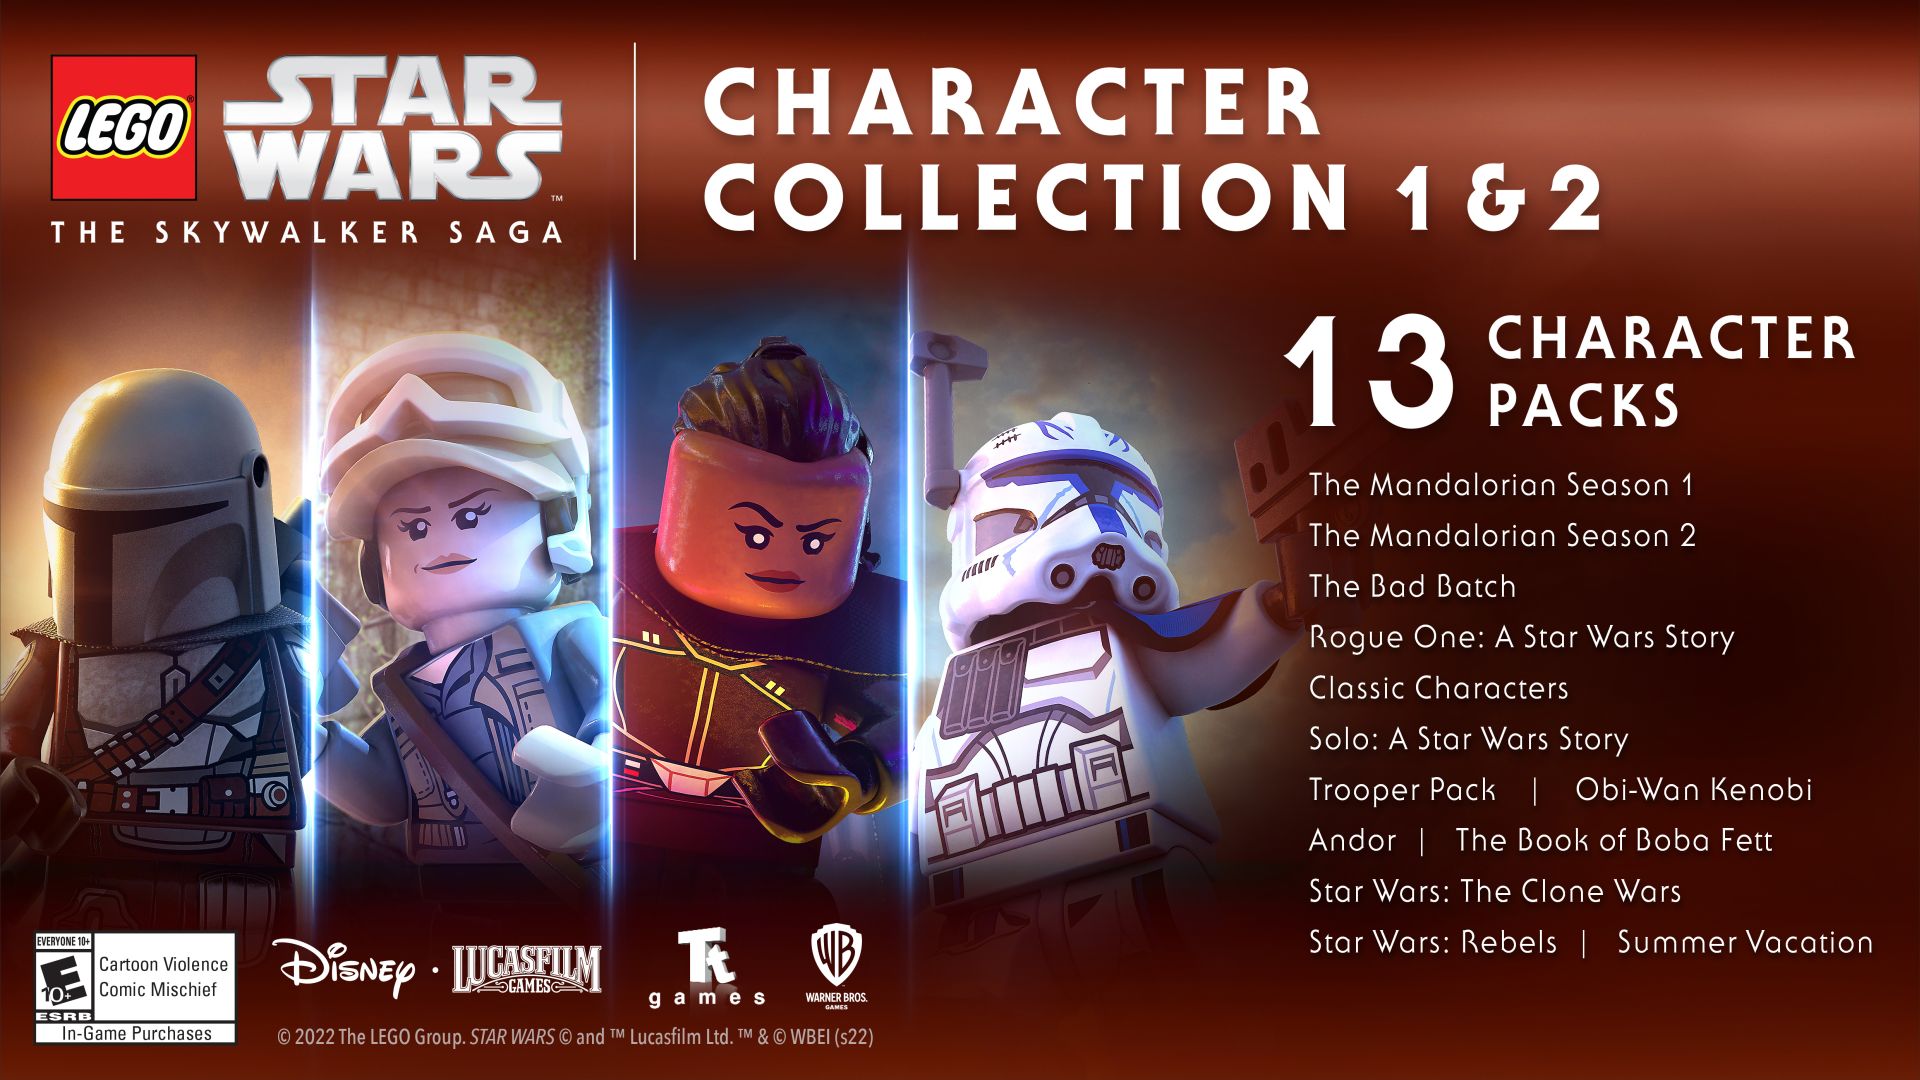 LEGO Star Wars - The Skywalker Saga_Character Collection 1 and 2